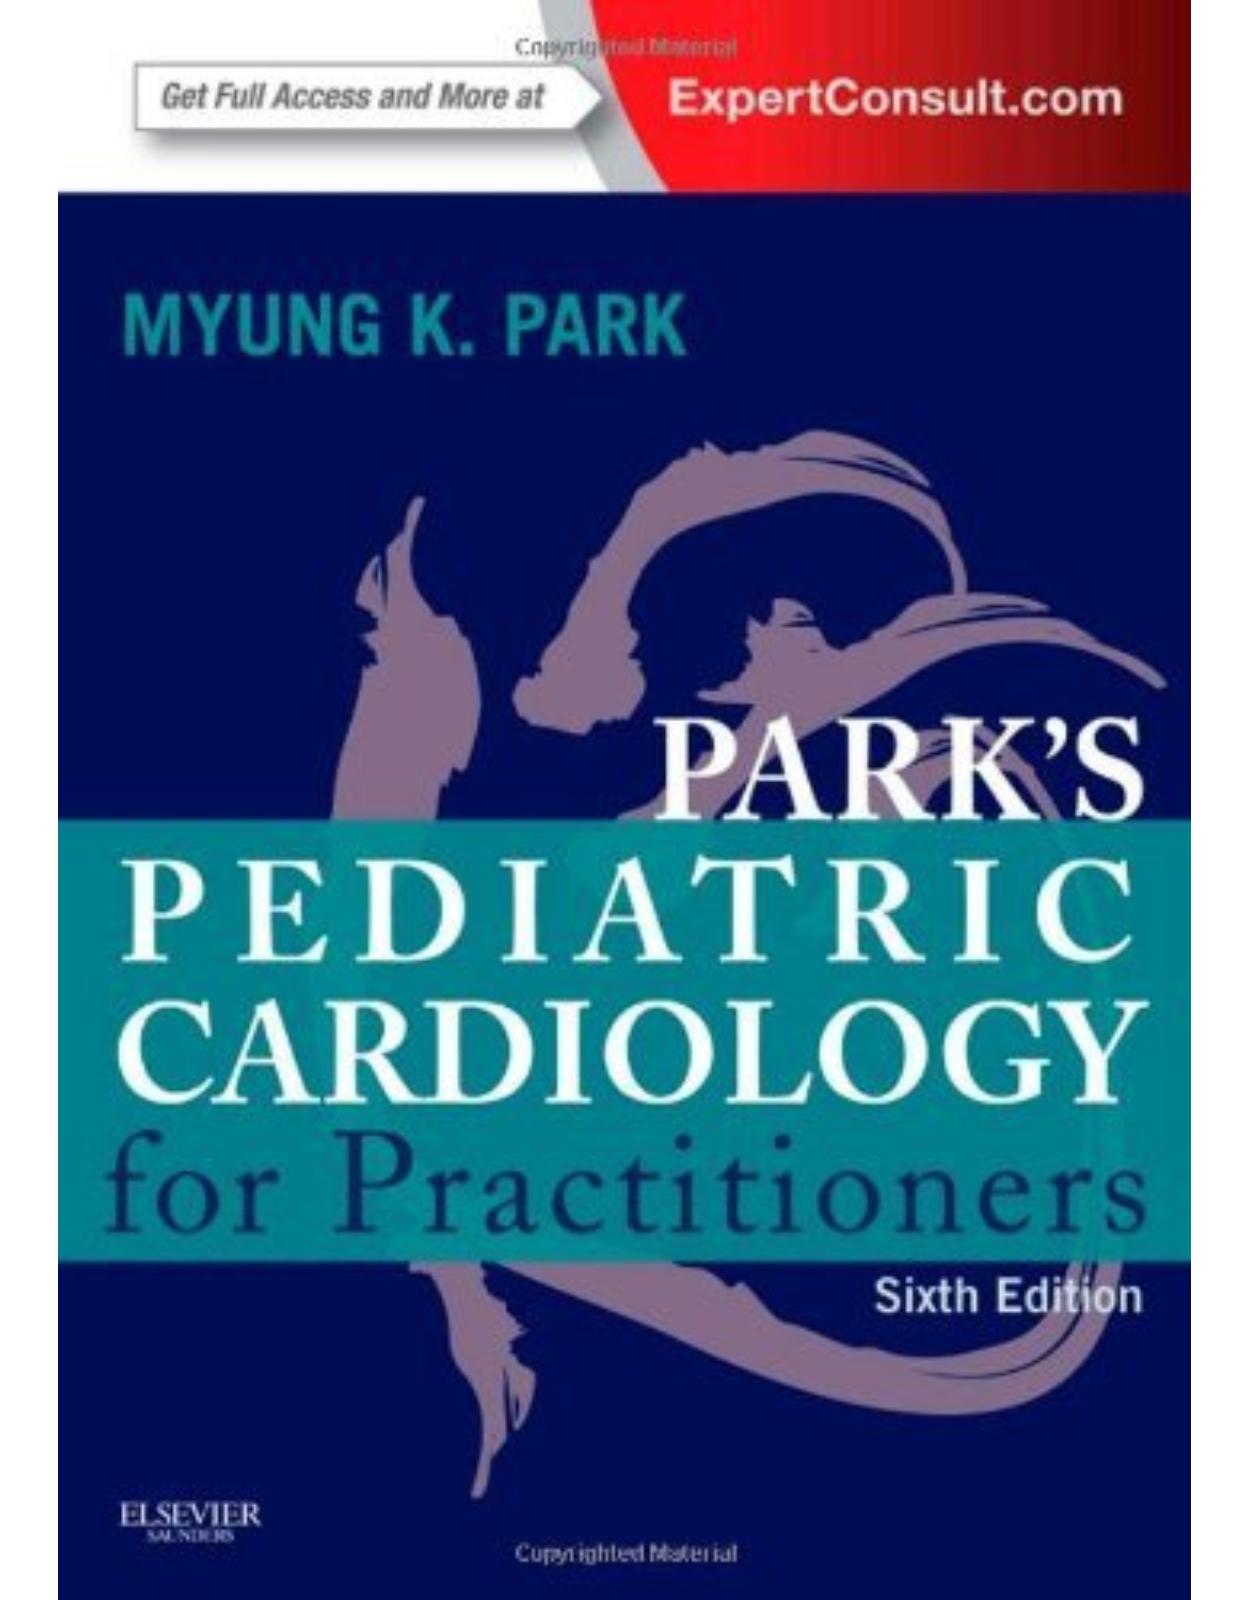 Park's Pediatric Cardiology for Practitioners, 6th Edition